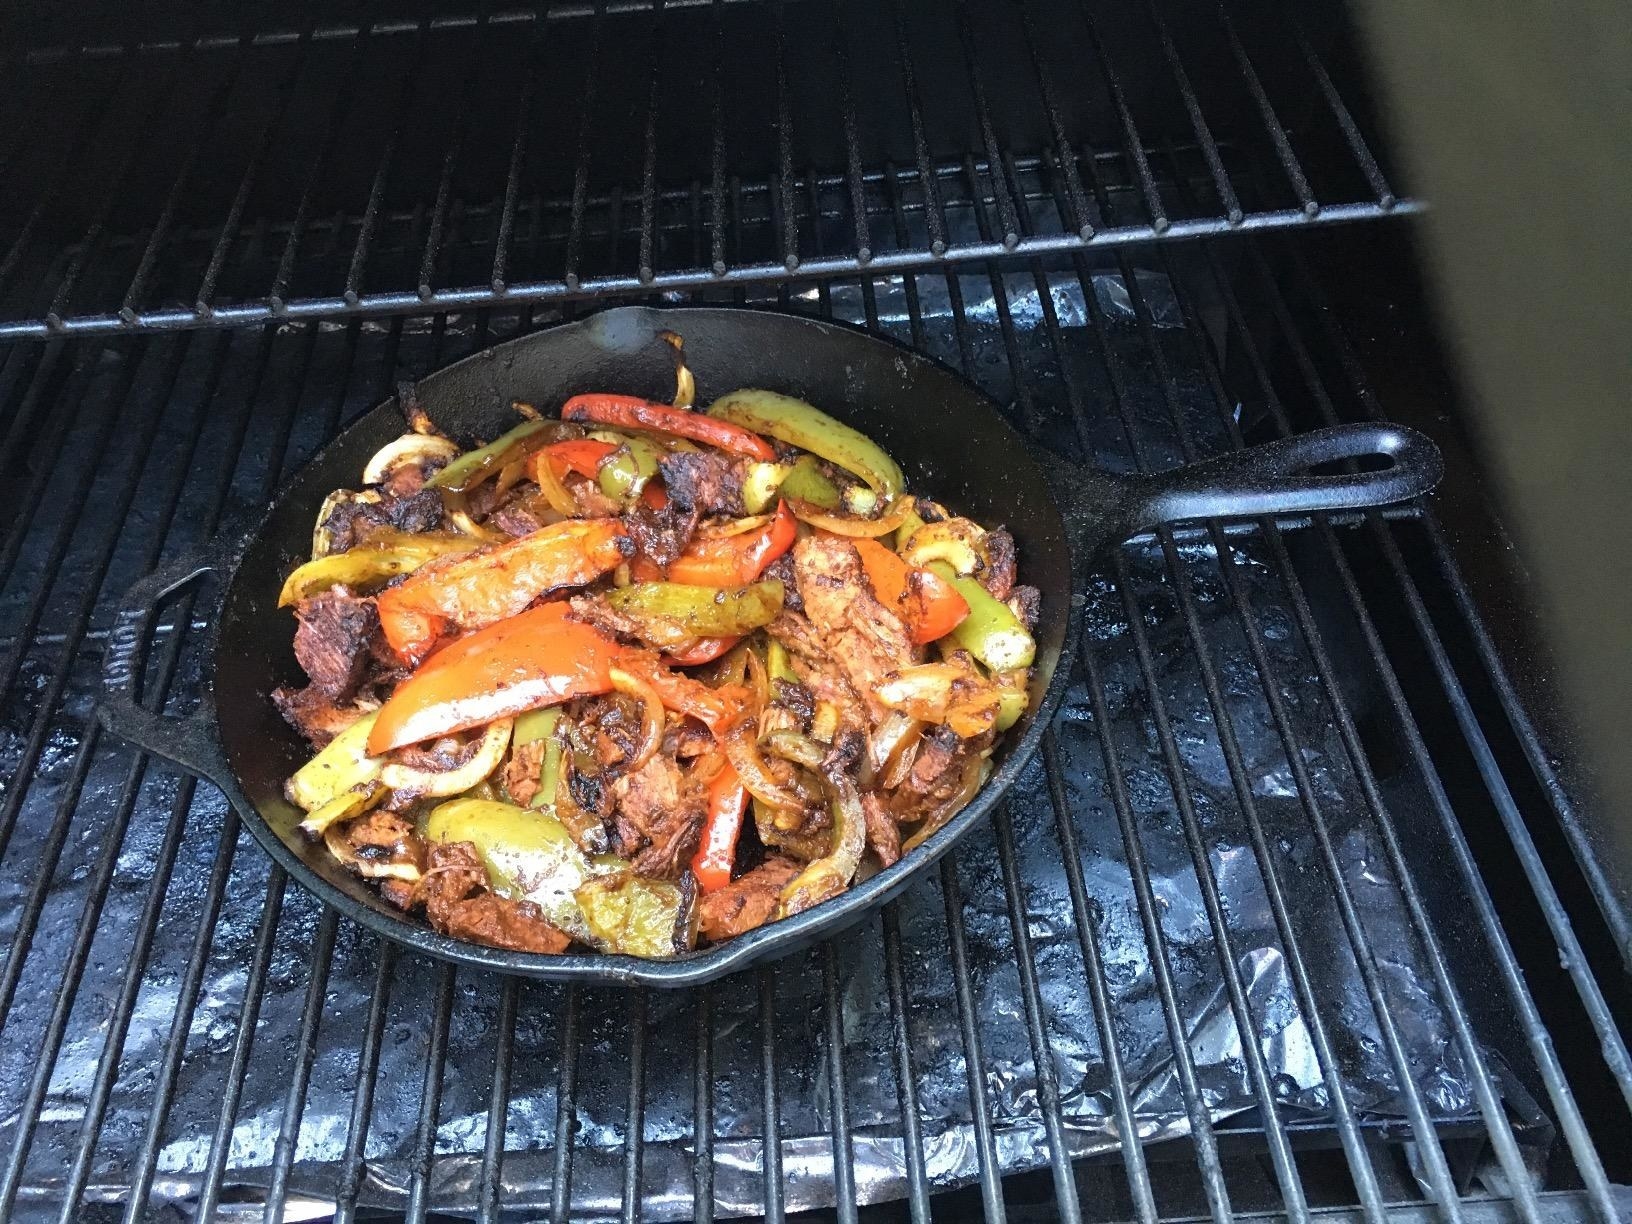 Chicken and pepper cooking in a cast iron skillet on the grill.